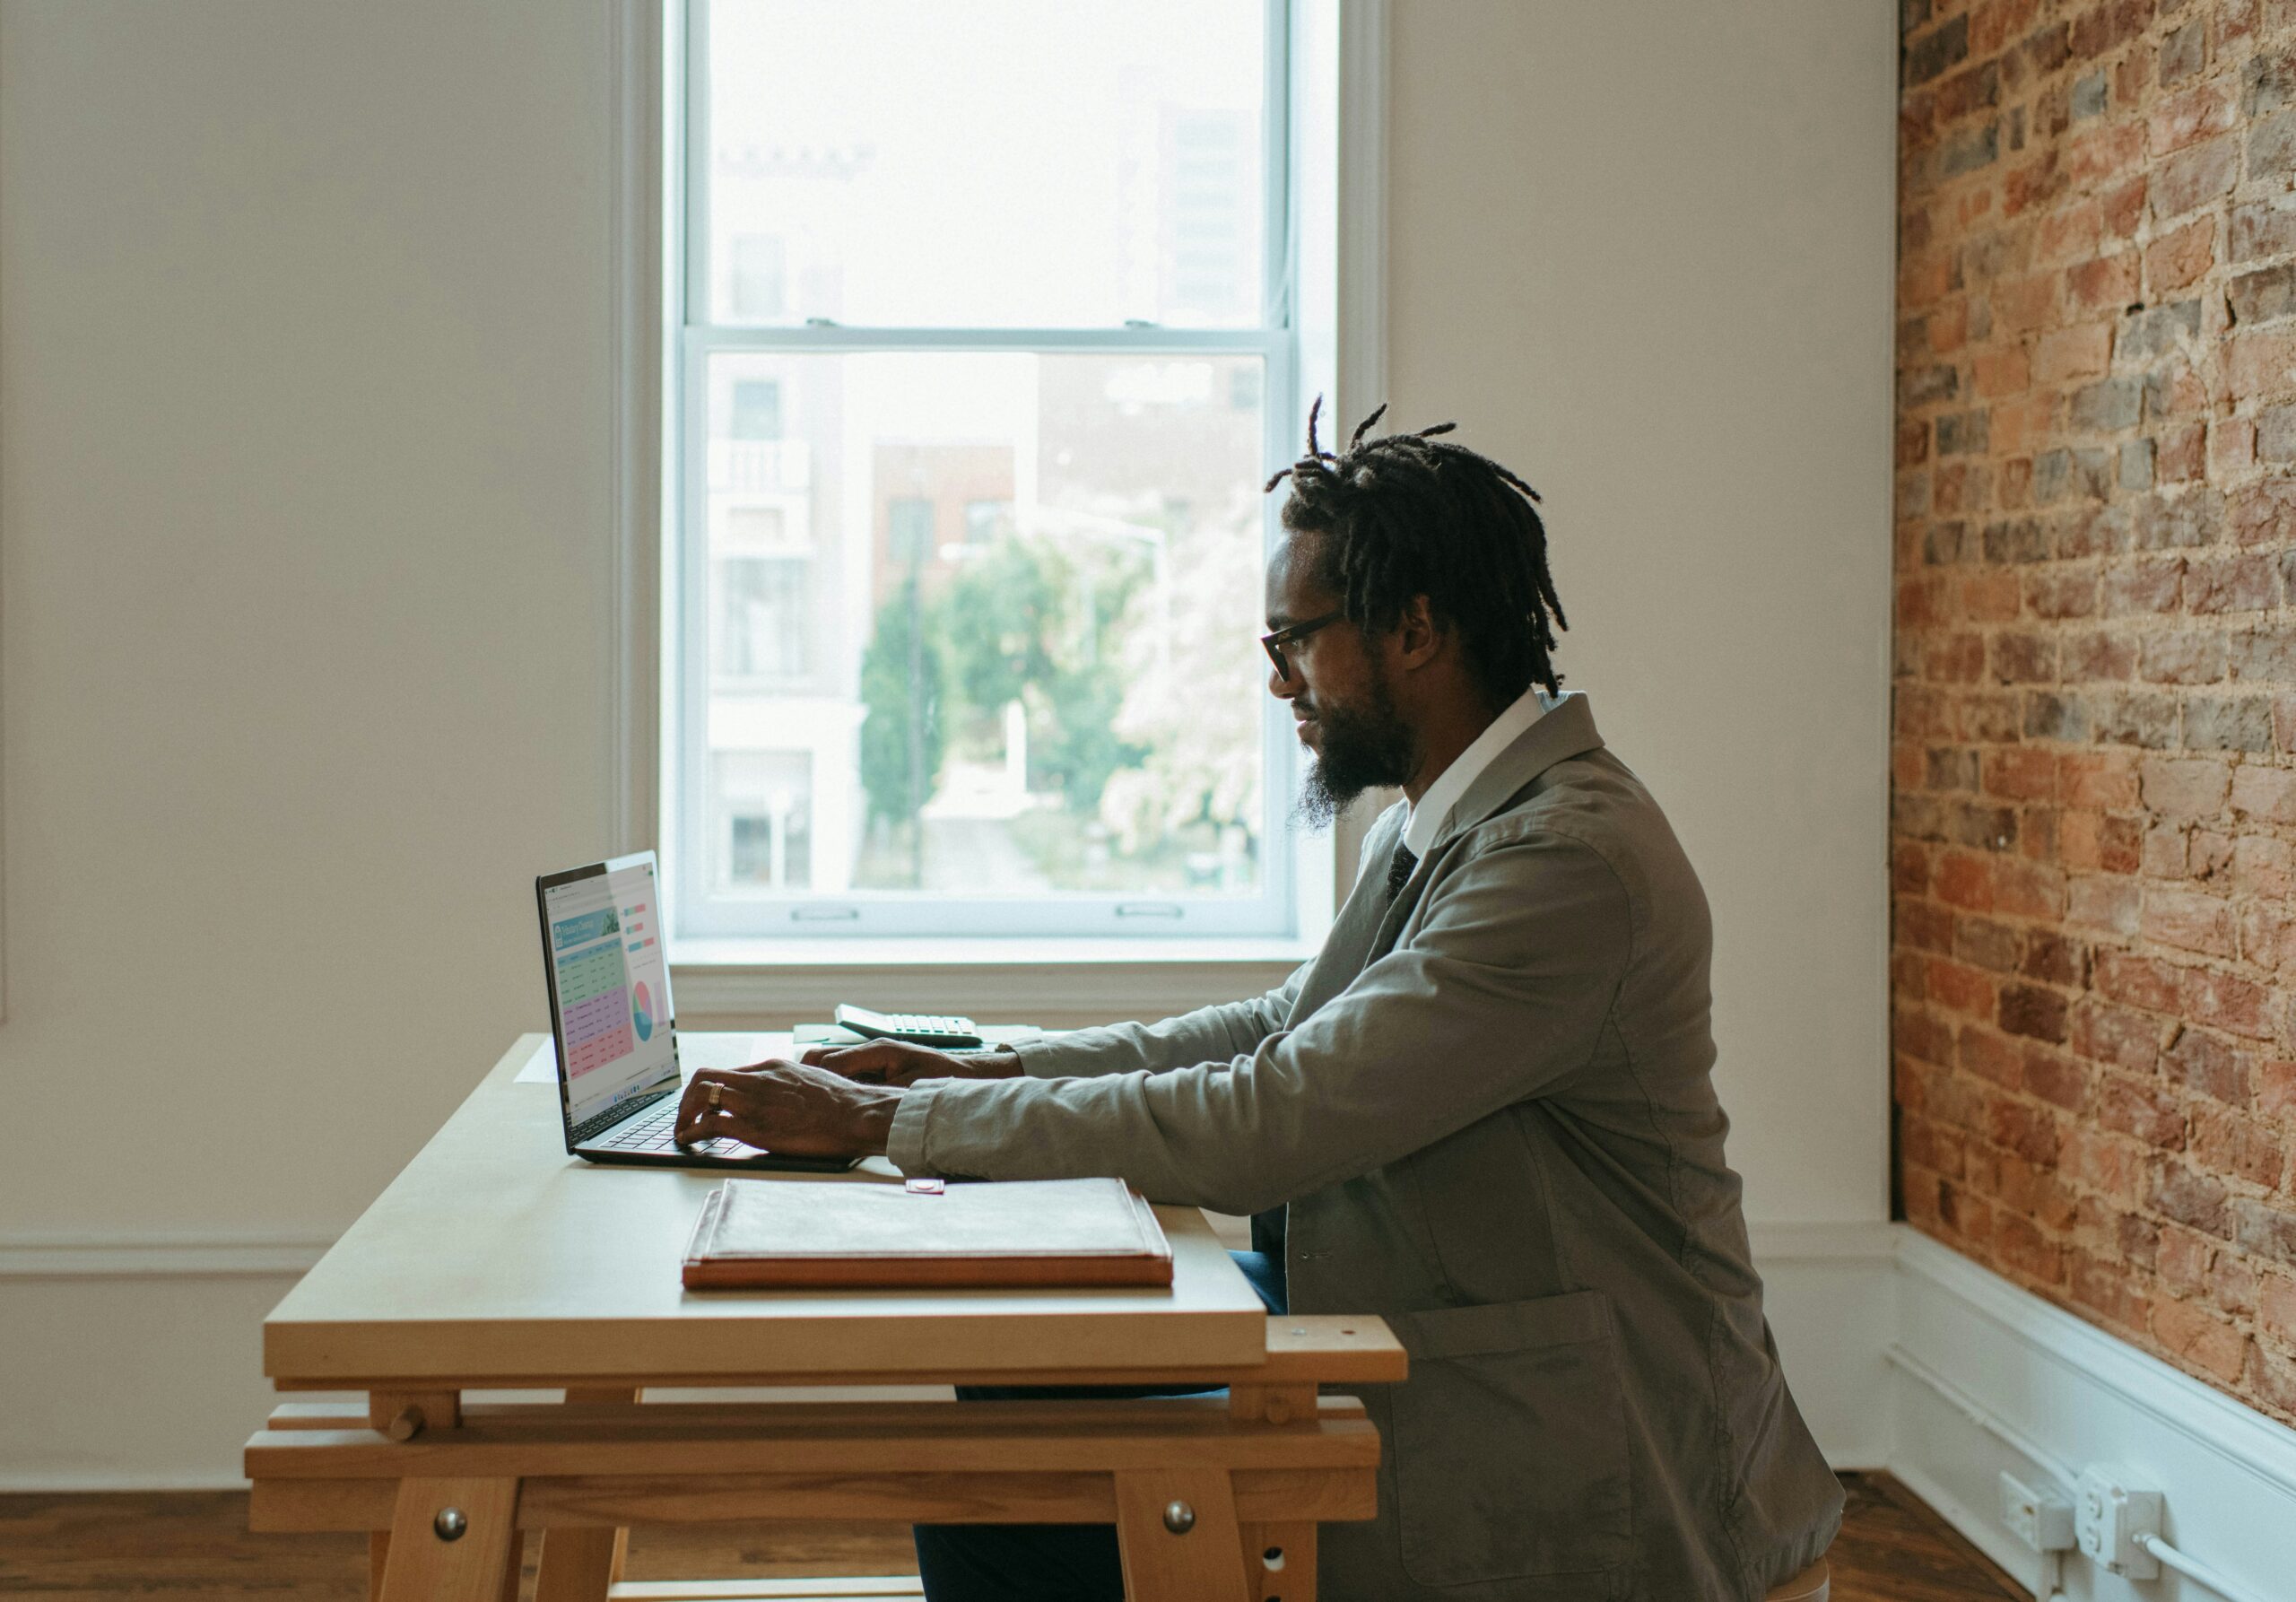 A man sits at a table in front of a window and works on a laptop.